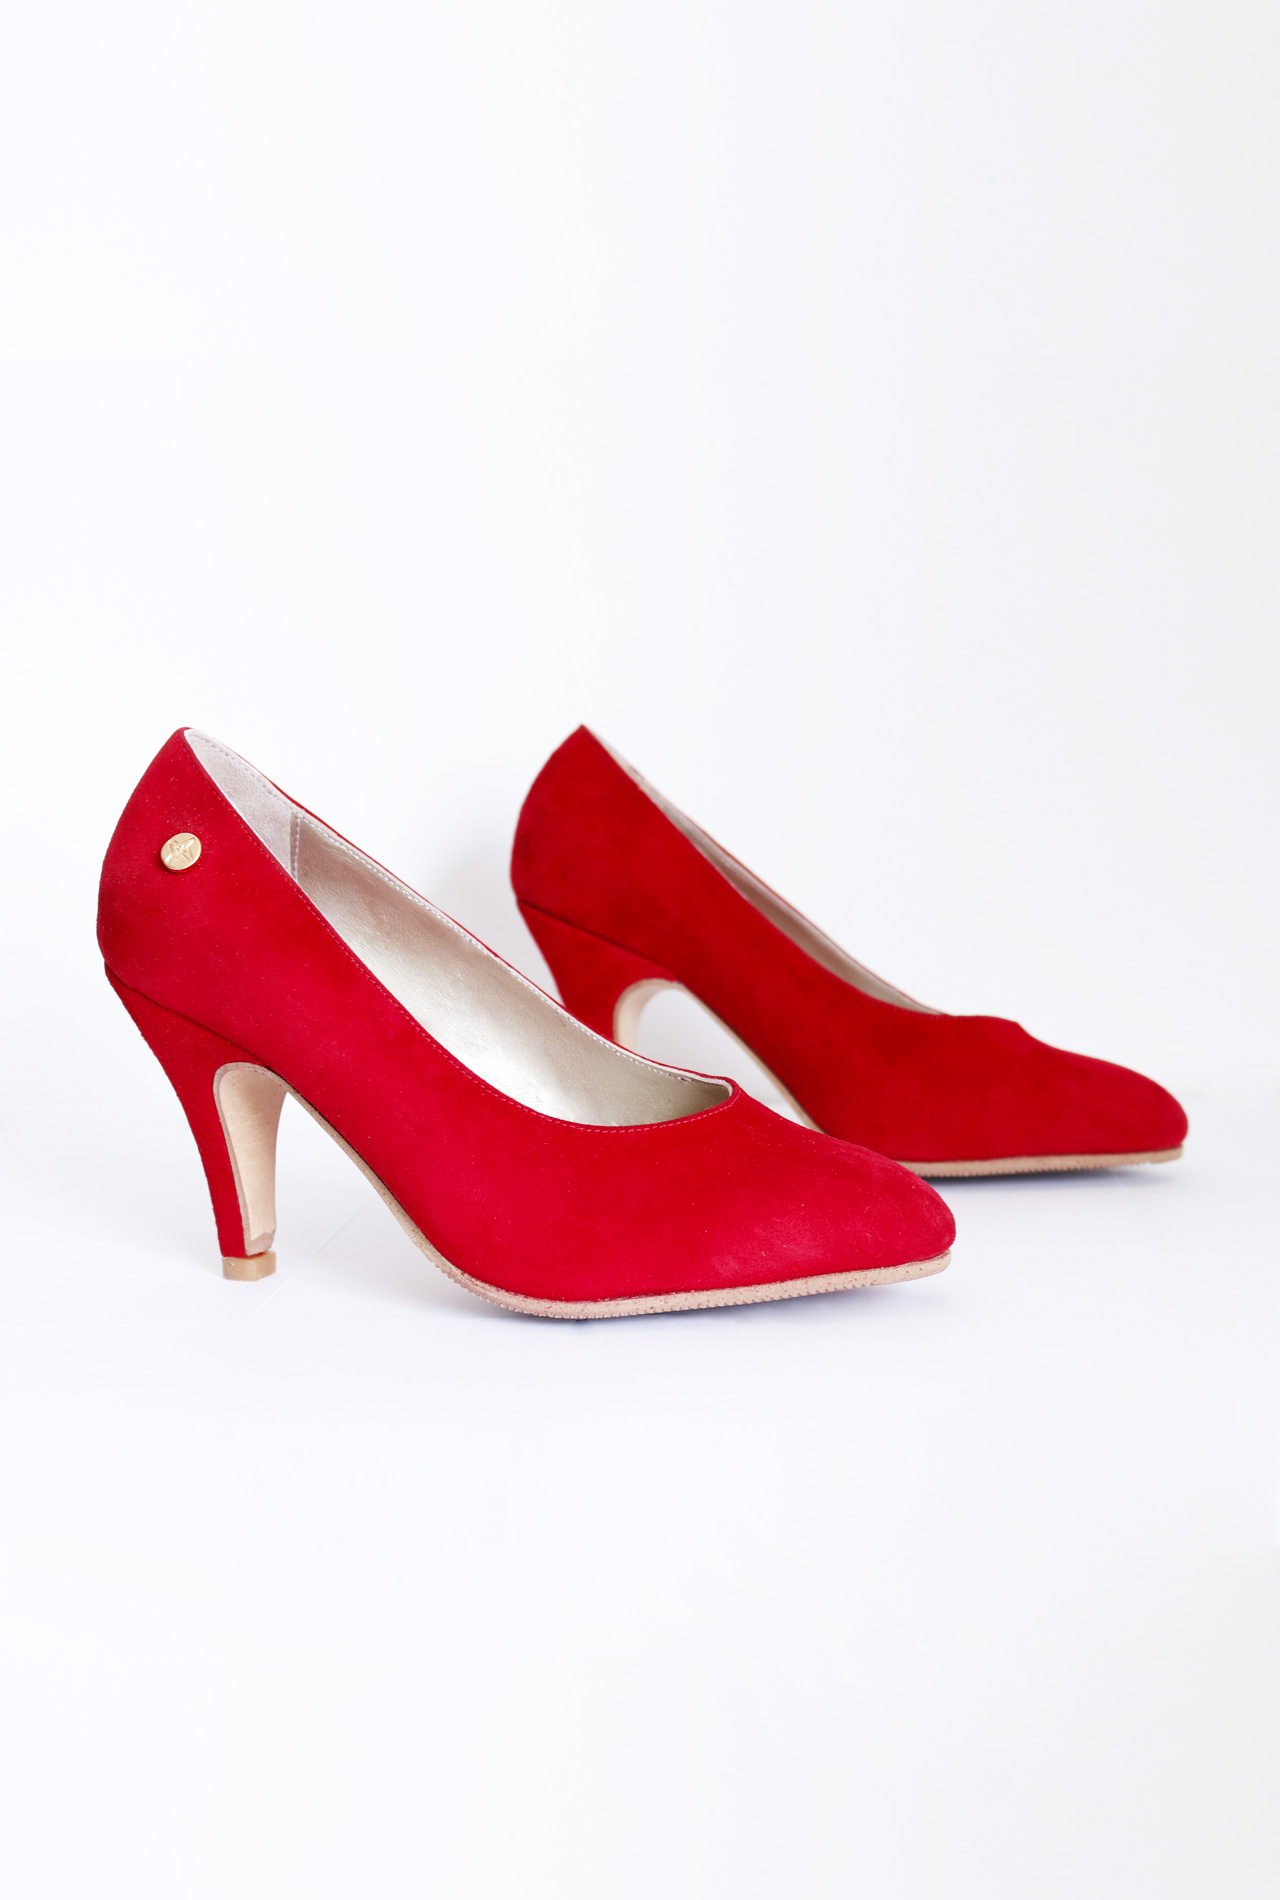 Red Suede Pumps in Small Size | Small 